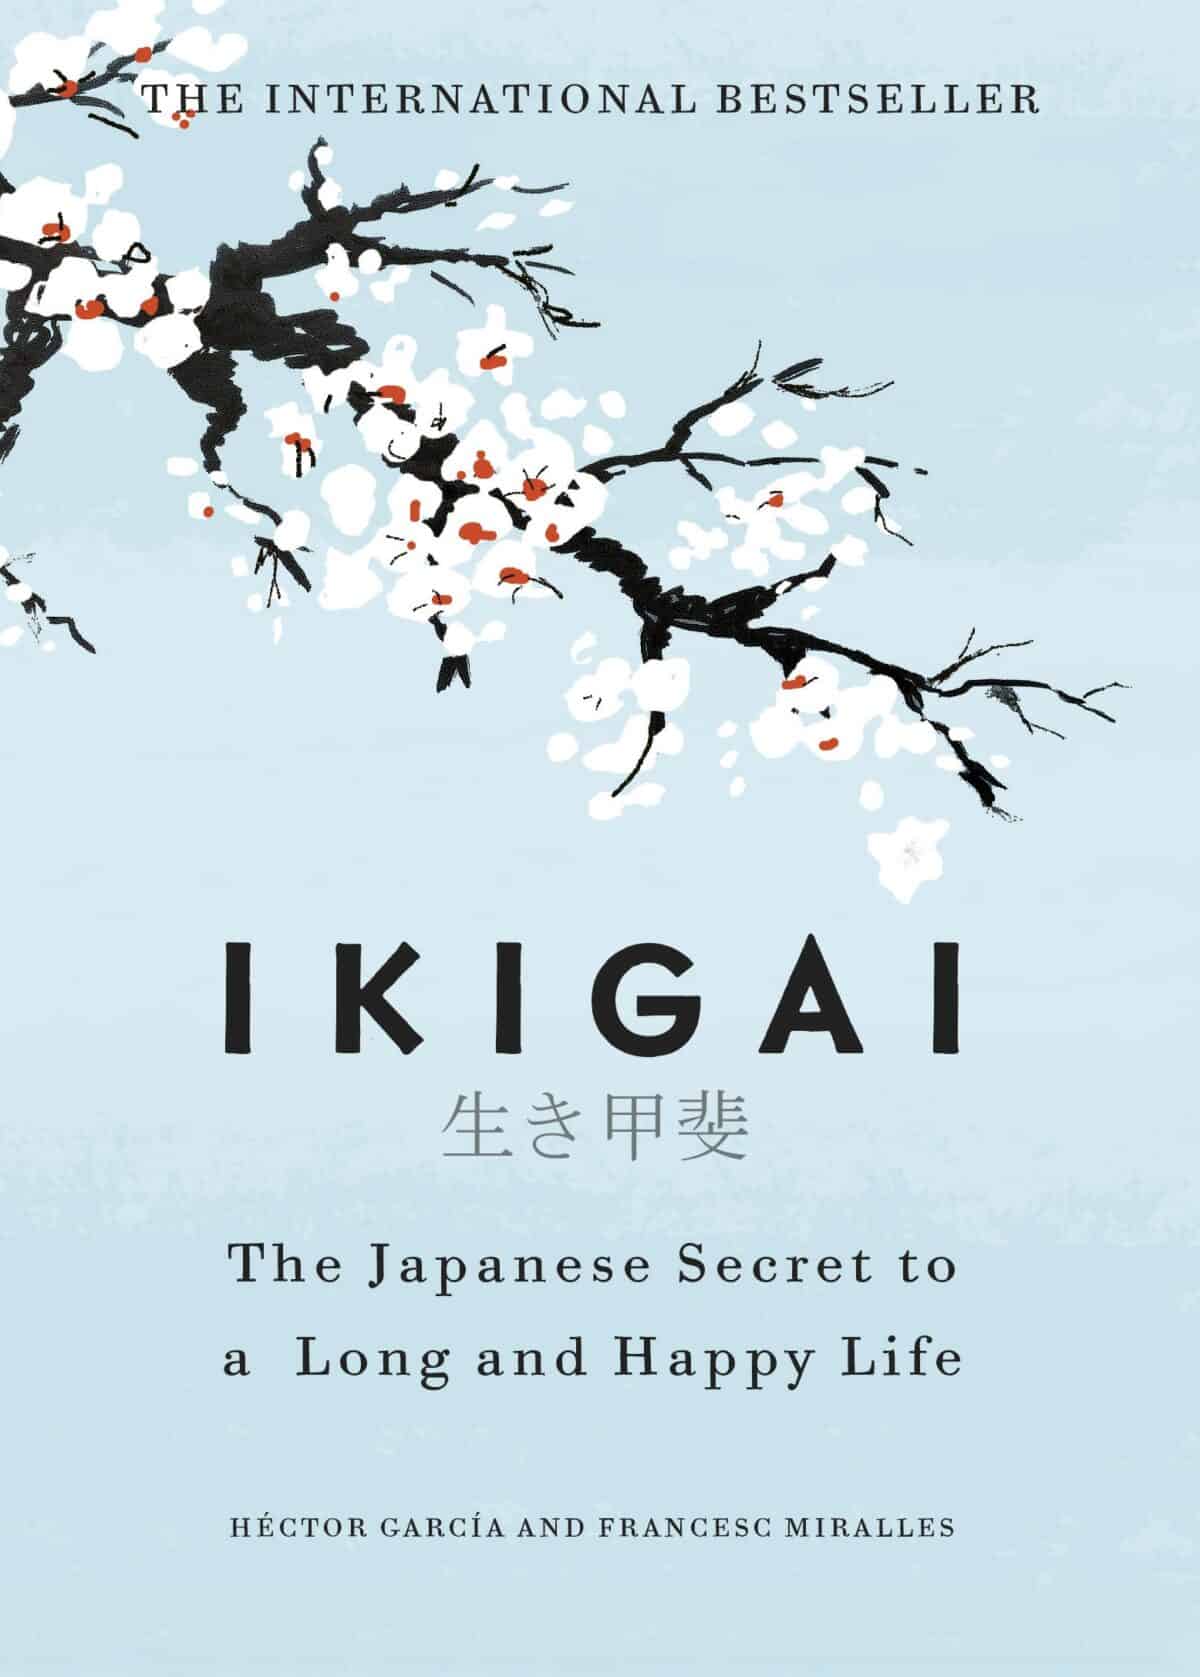 Book cover for Ikigai: The Japanese Secret to a Long and Happy Life by Héctor García and Francesc Miralles